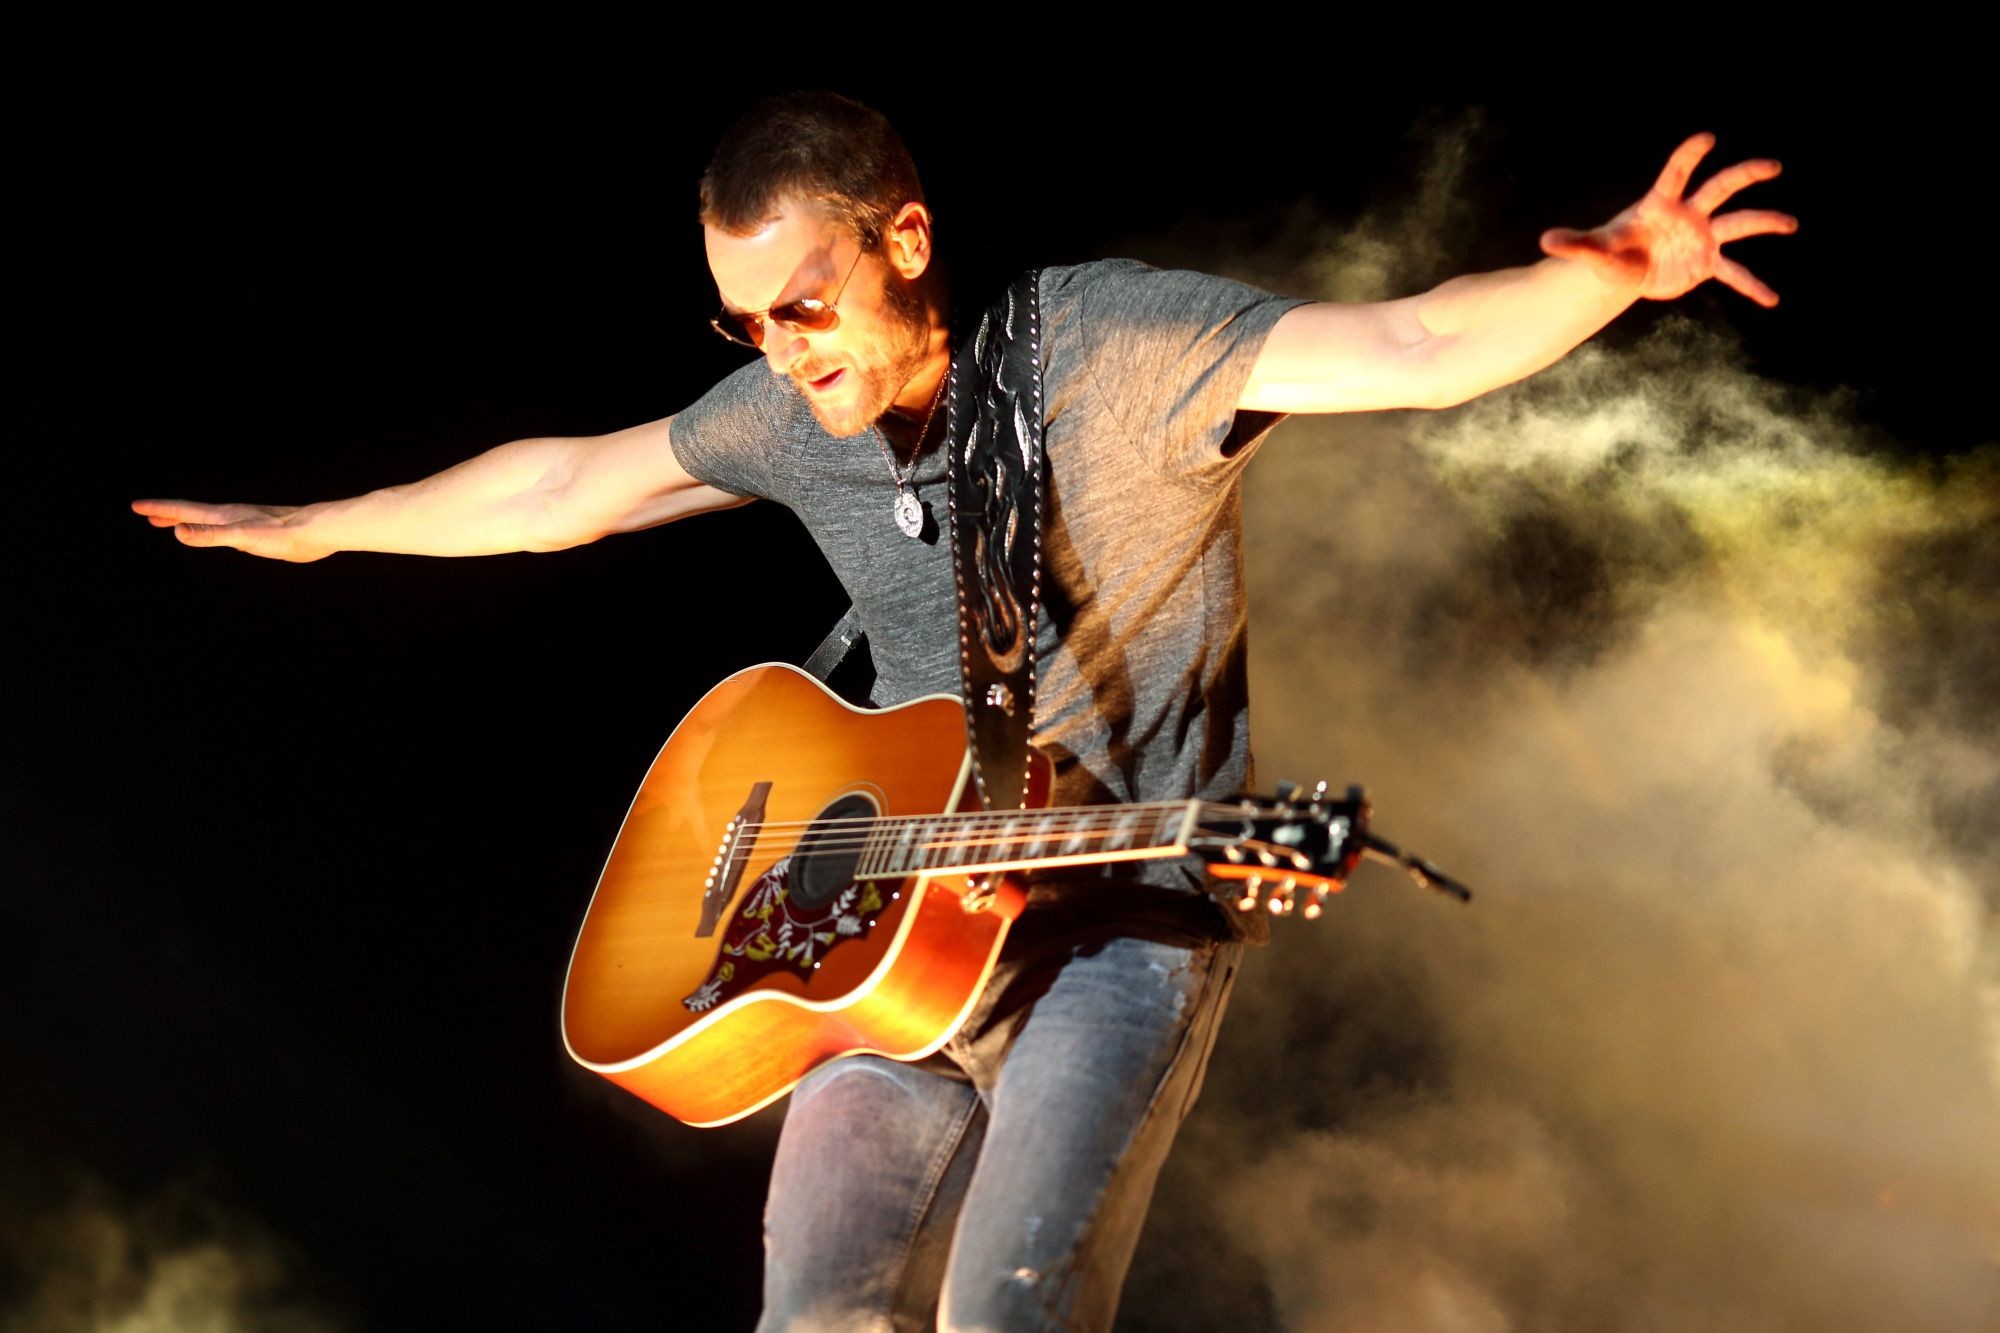 2000x1333 Eric Church at Stagecoach: 'I'm Just Trying to Have Some Fun' - Radio.com